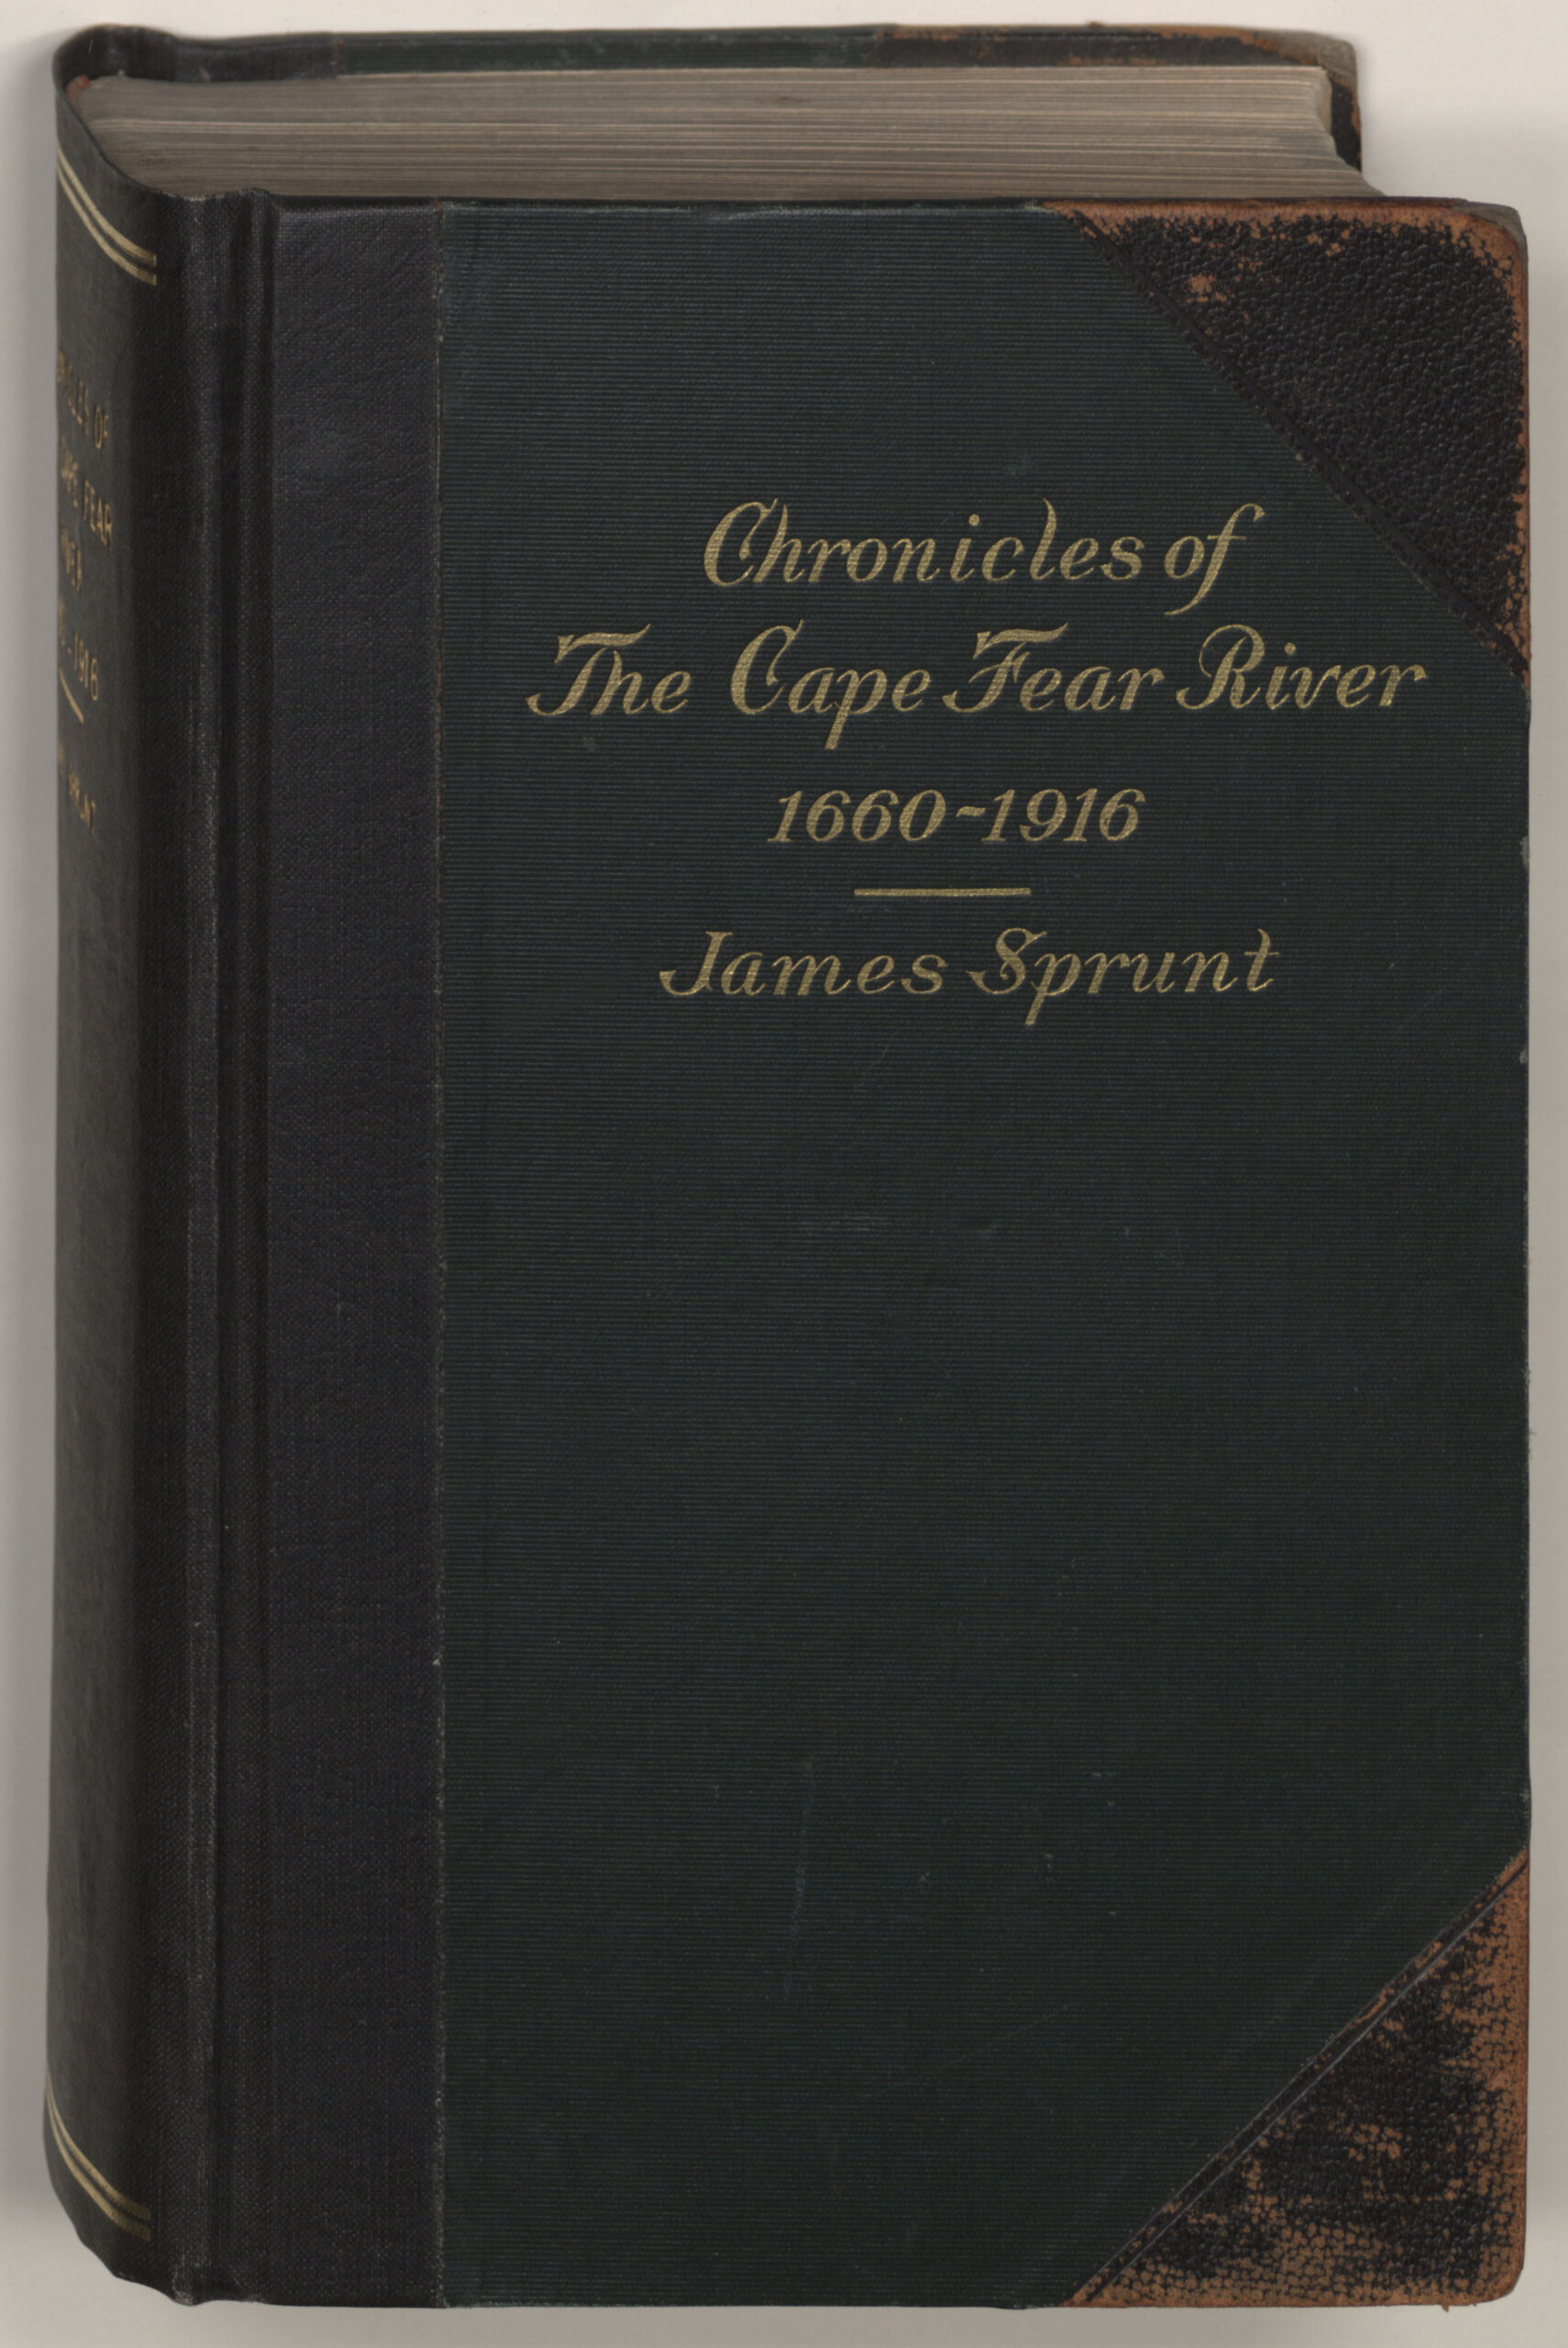 Chronicles of the Cape Fear river, - - ECU Digital Collections